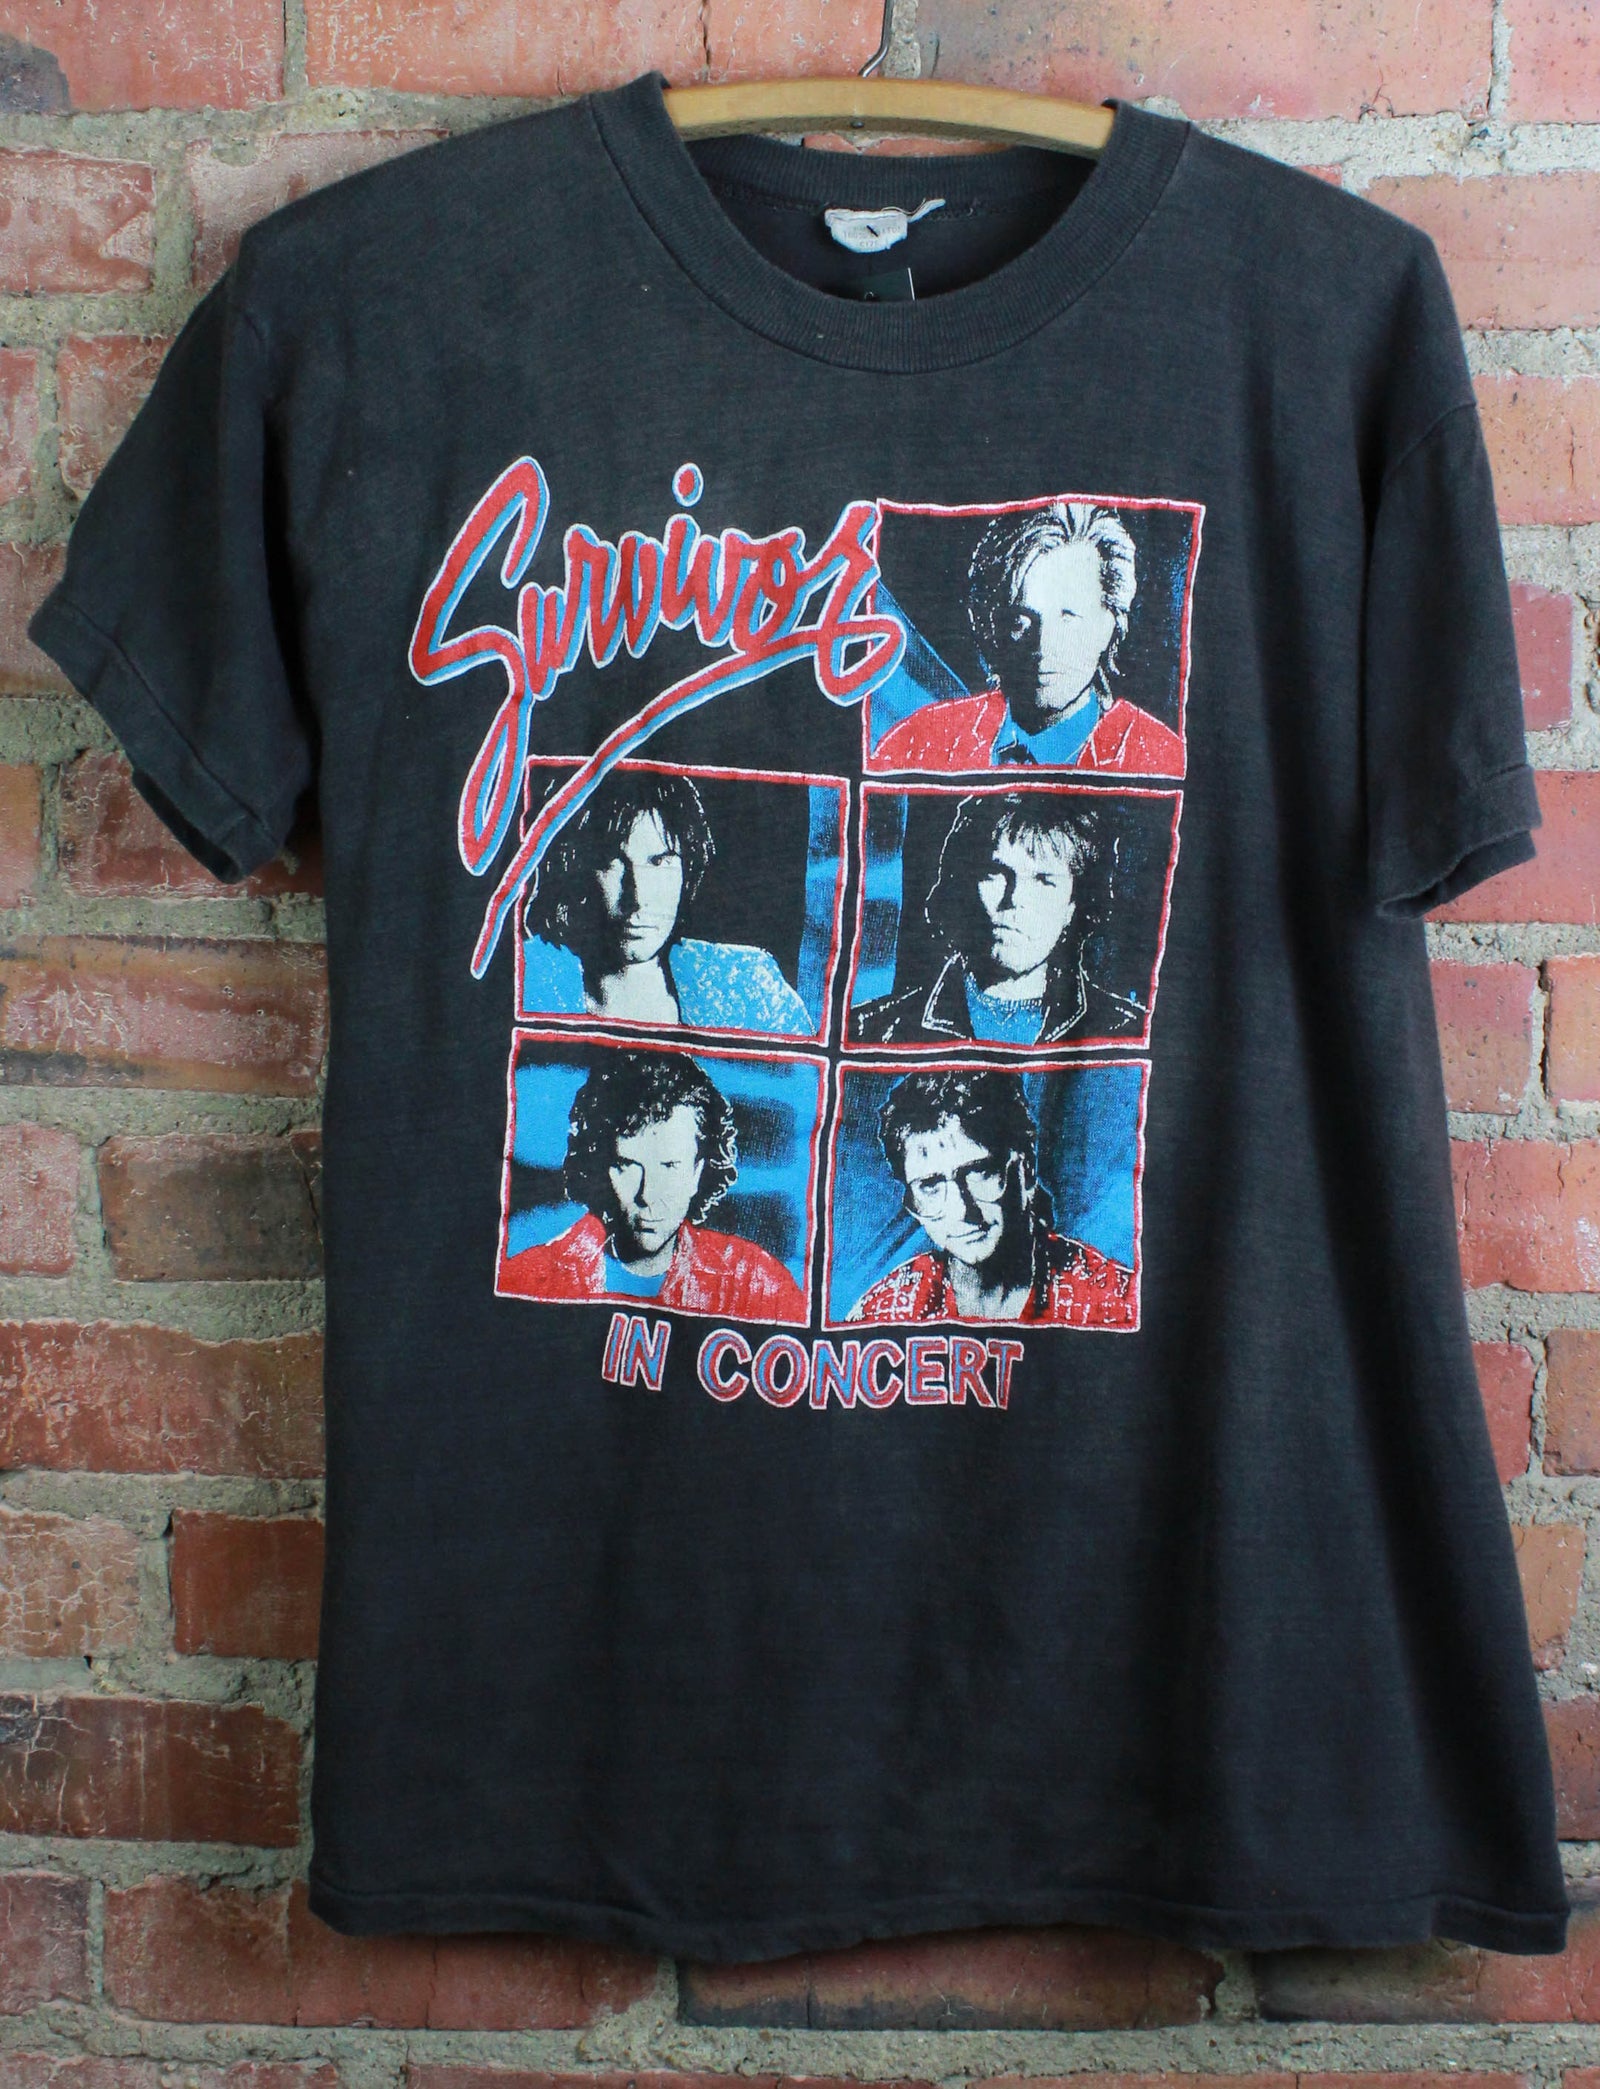  80's Rock T Shirts Band Tee Vintage Band T Shirts Concert :  Clothing, Shoes & Jewelry